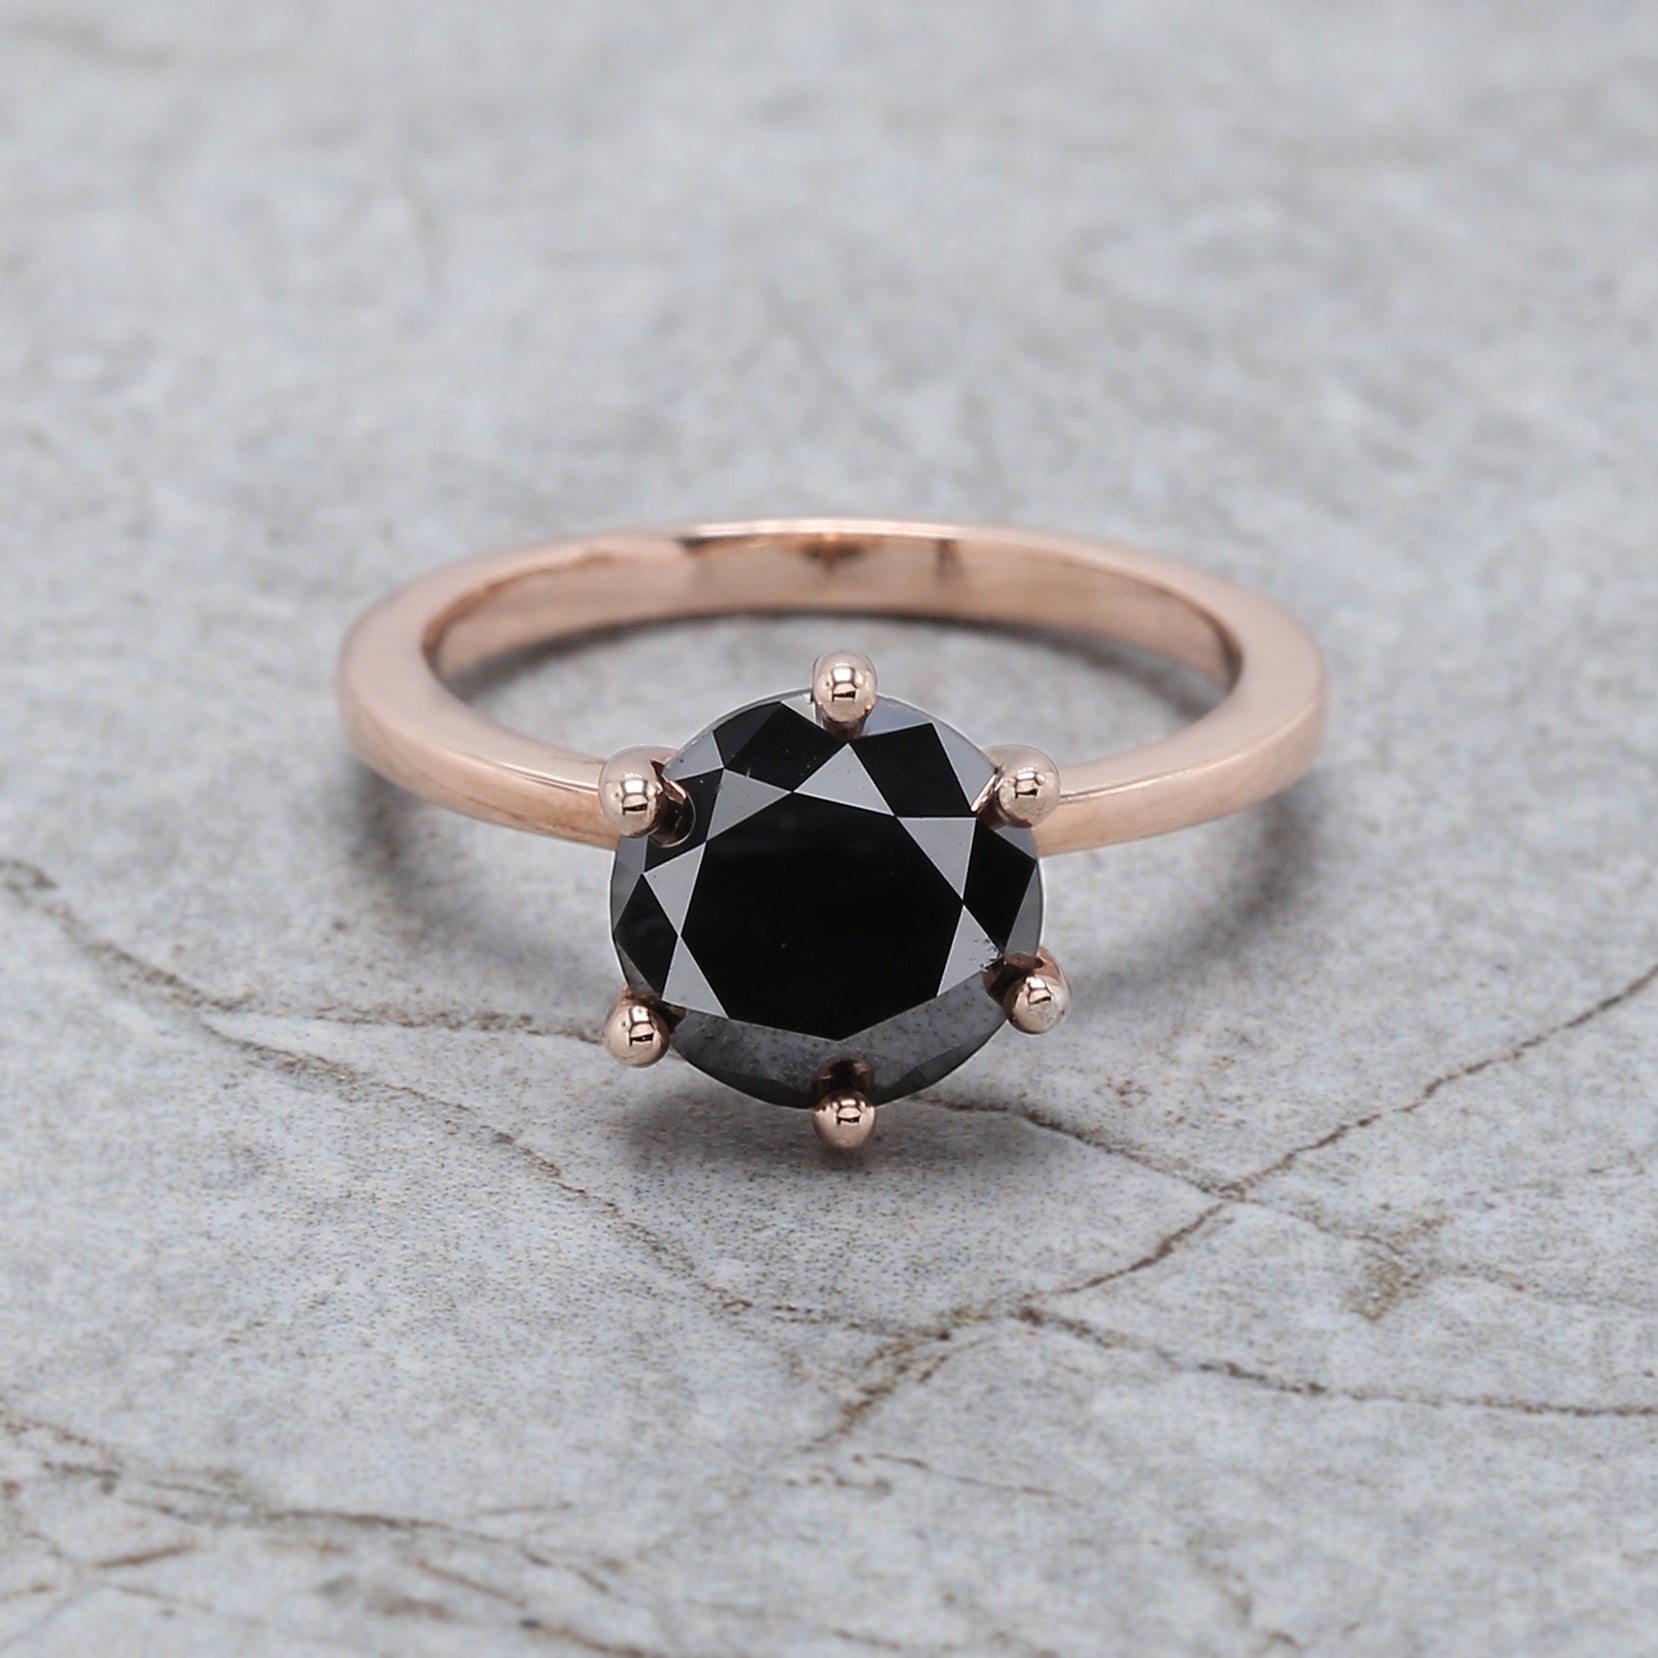 Round Cut Black Color Diamond Ring 2.65 Ct 8.55 MM Round Shape Diamond Ring 14K Solid Rose Gold Silver Engagement Ring Gift For Her QL9631